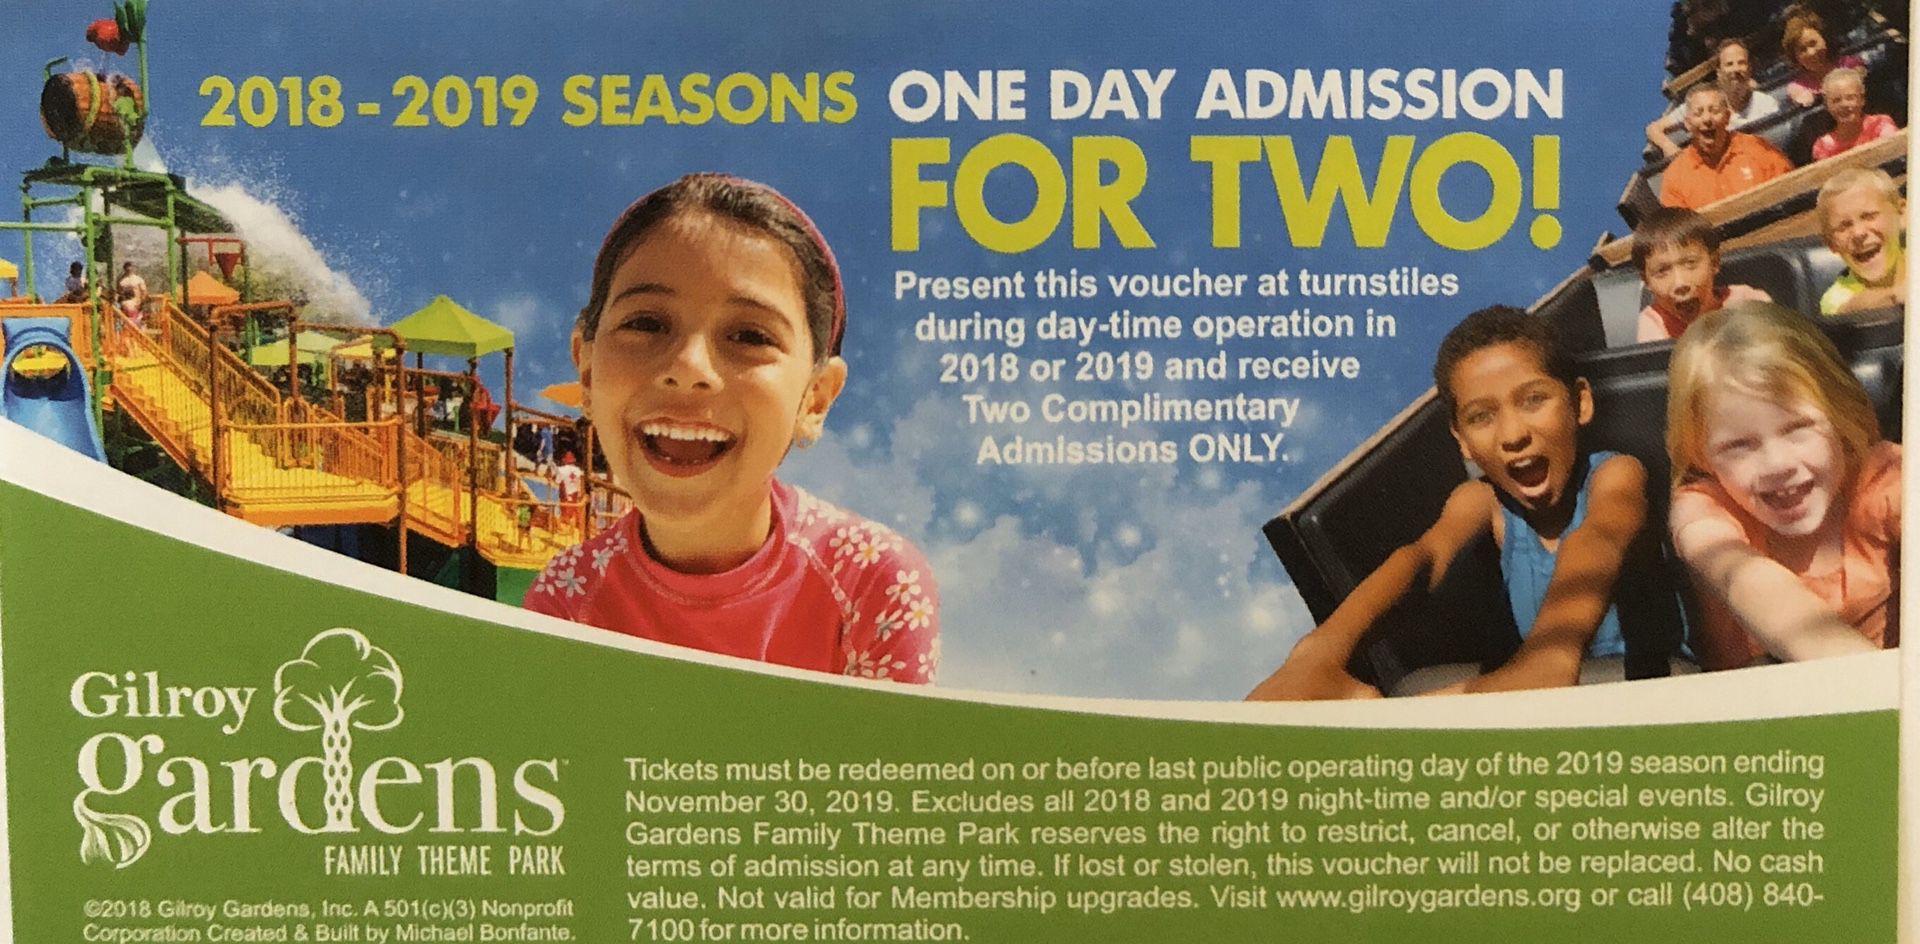 Gilroy Gardens One day admission for 2